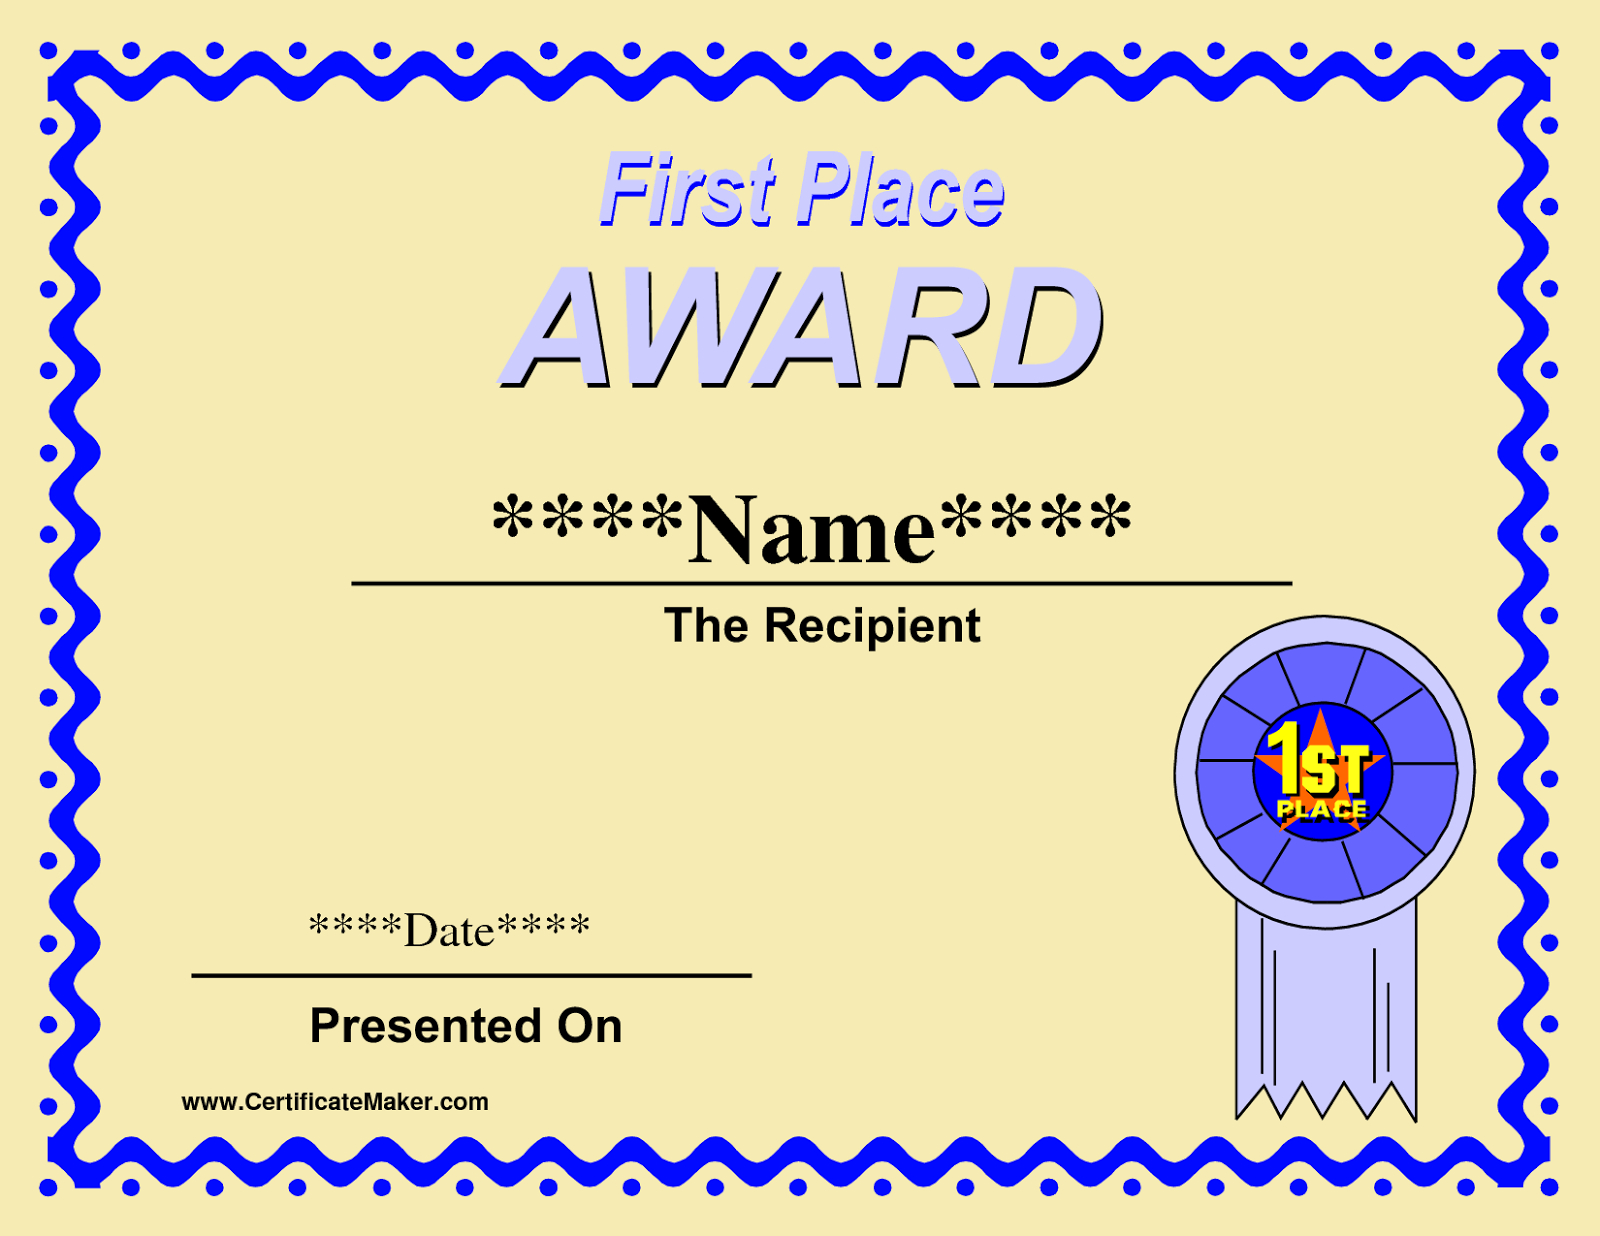 Printable Winner Certificate Templates | Certificate Intended For First Place Award Certificate Template